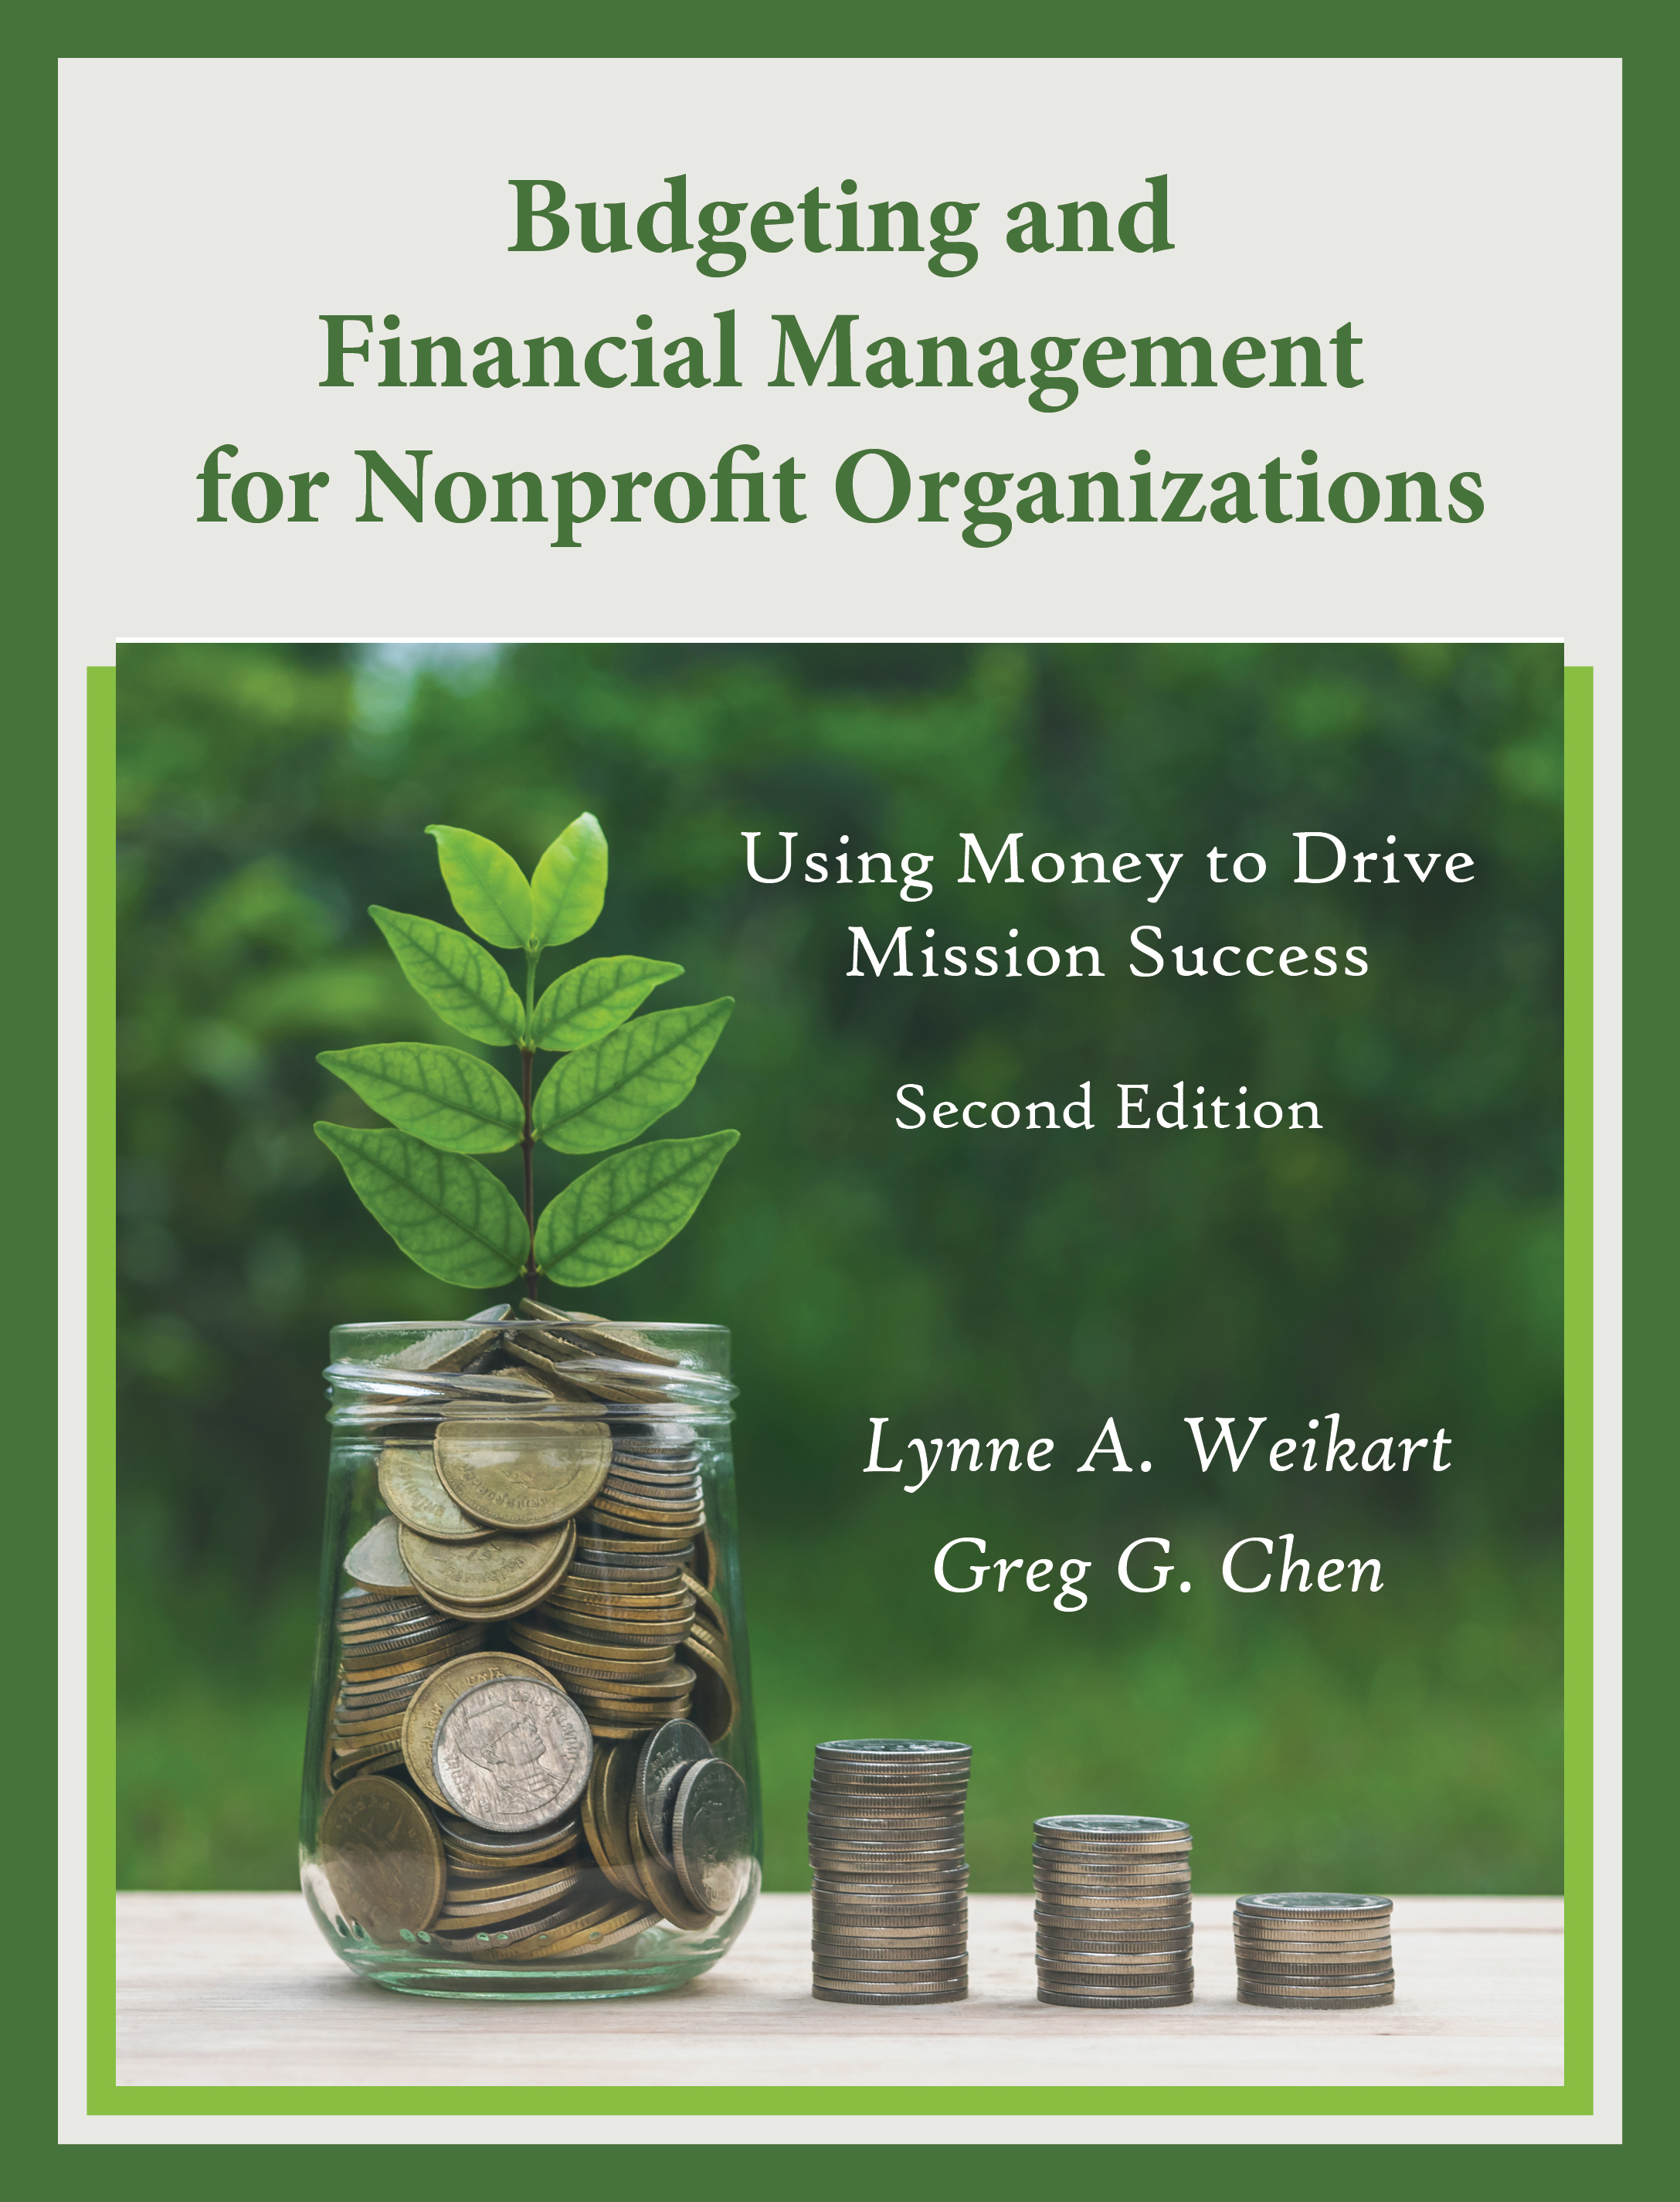 Budgeting and Financial Management for Nonprofit Organizations: Using Money to Drive Mission Success, Second Edition by Lynne A. Weikart, Greg G. Chen